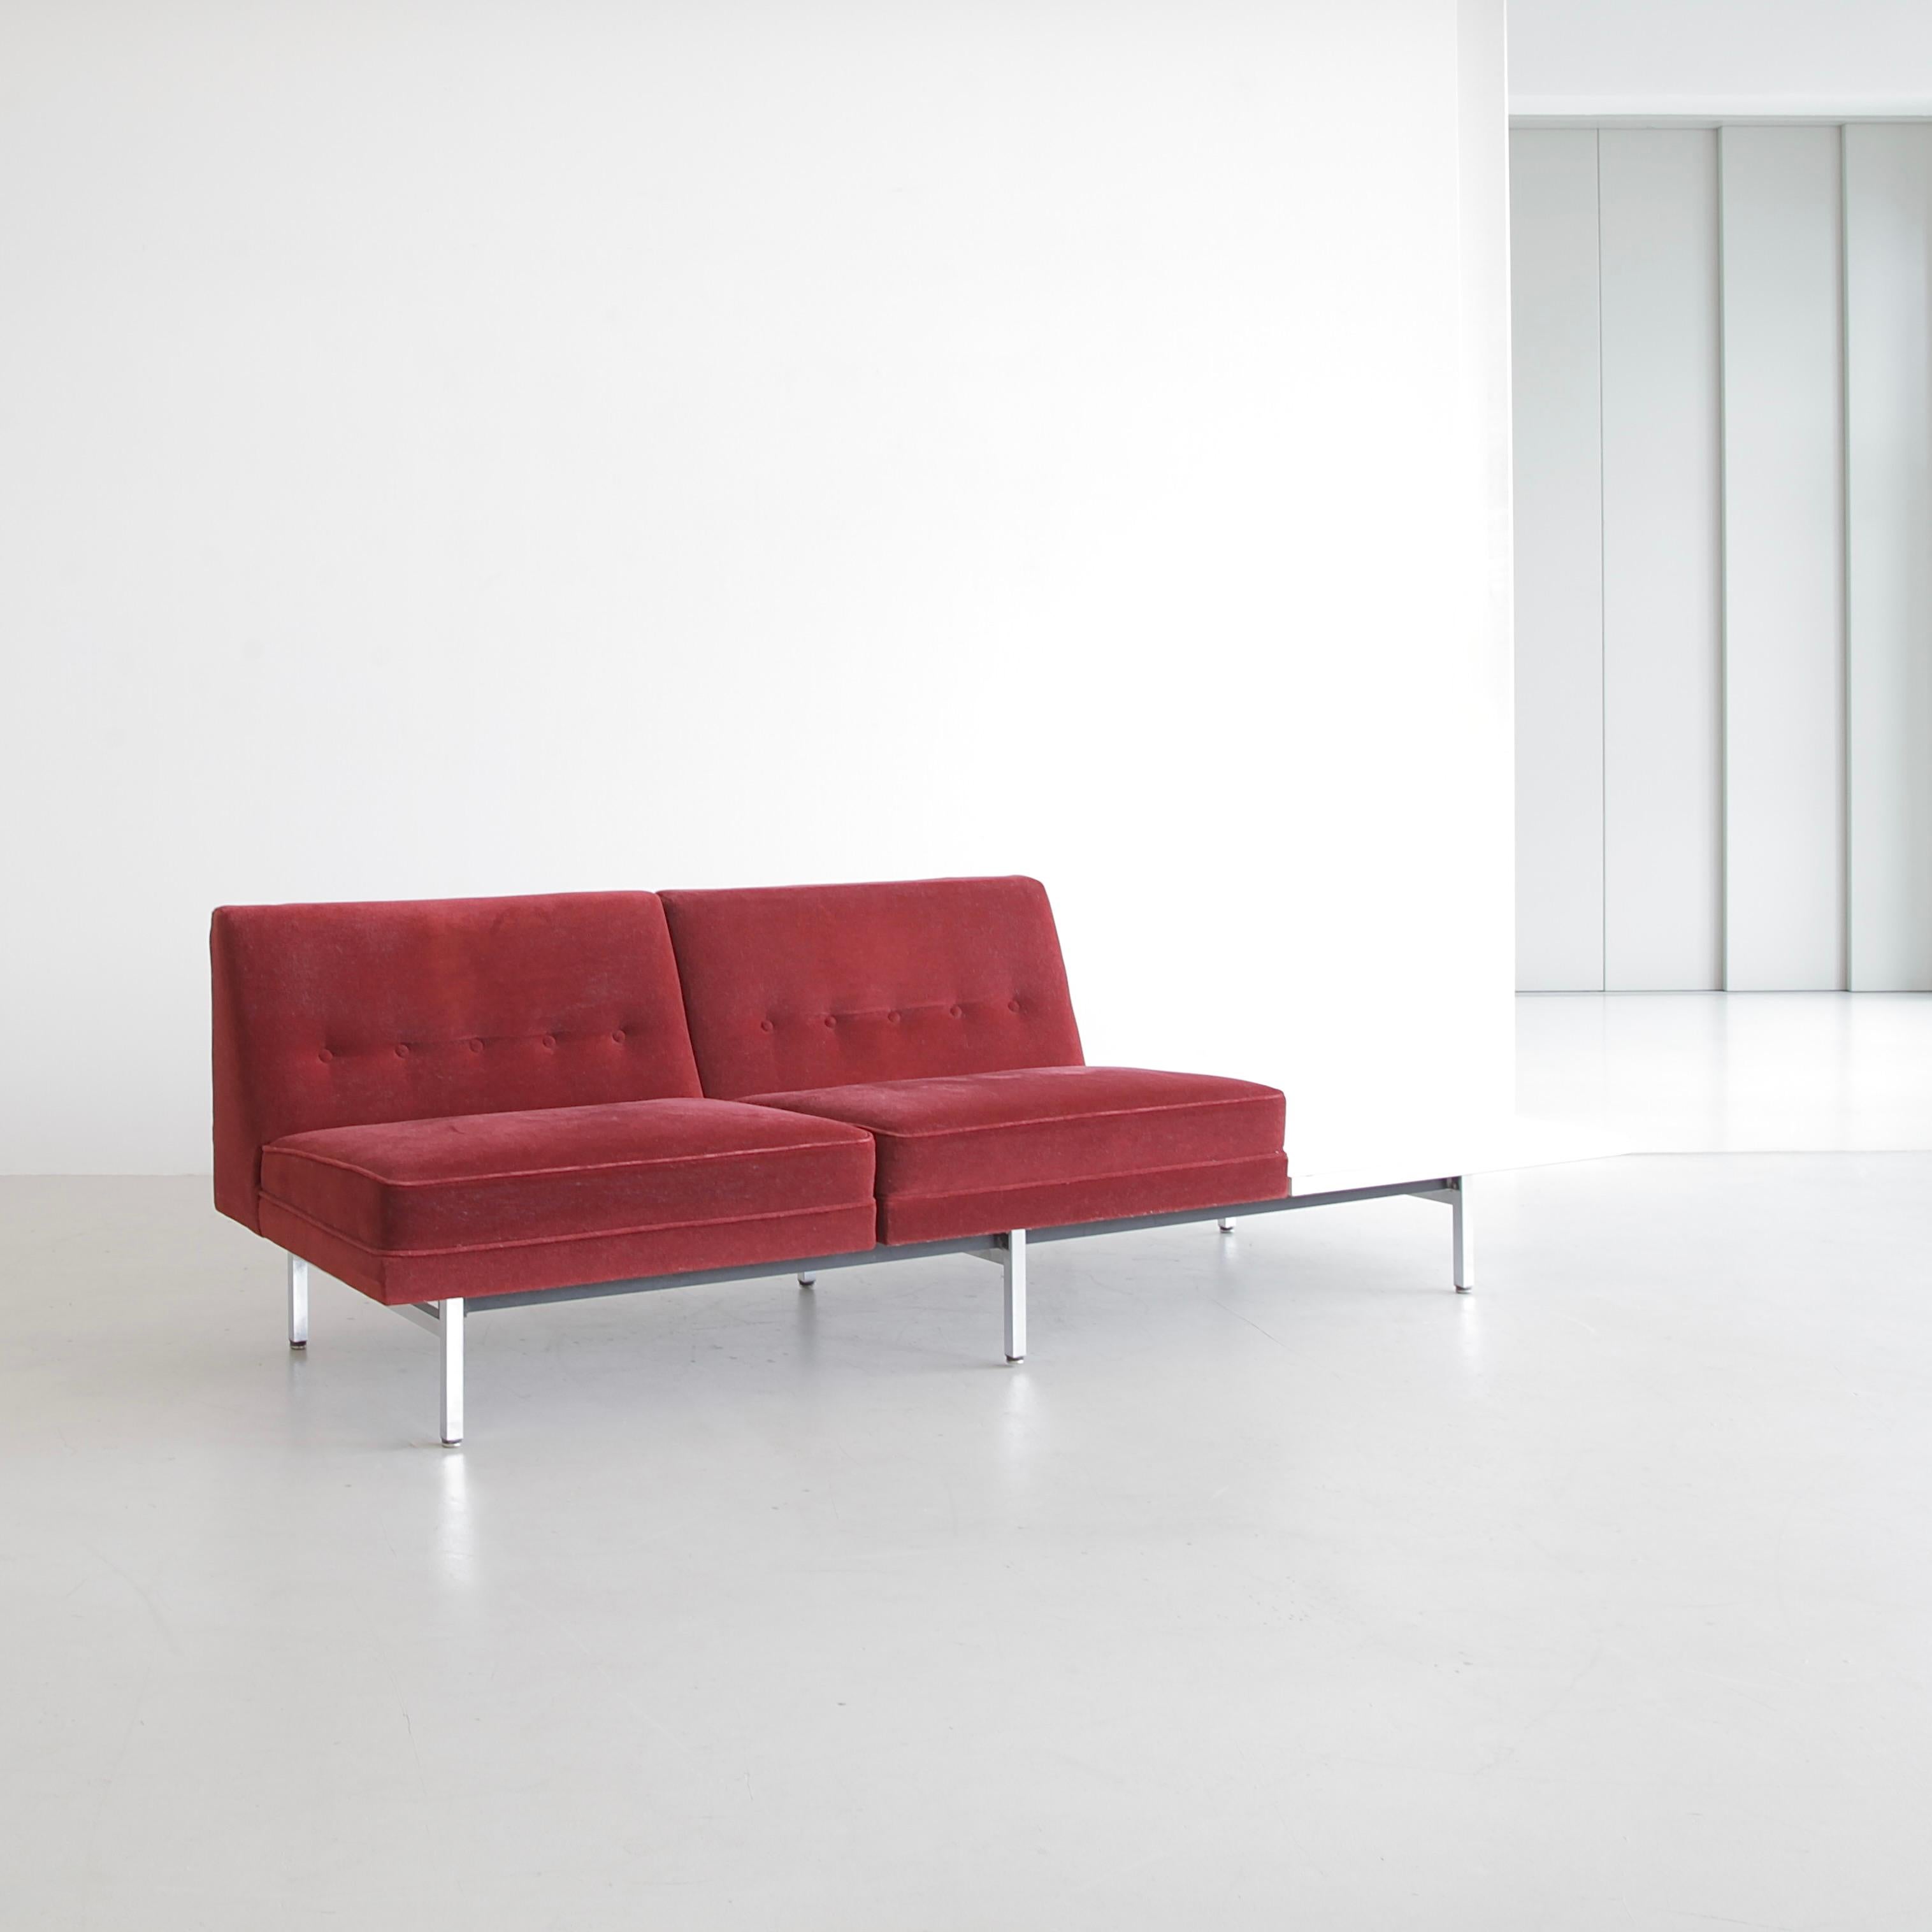 Mid-20th Century Modular Sofa designed by George NELSON for HERMAN MILLER, 1960s For Sale